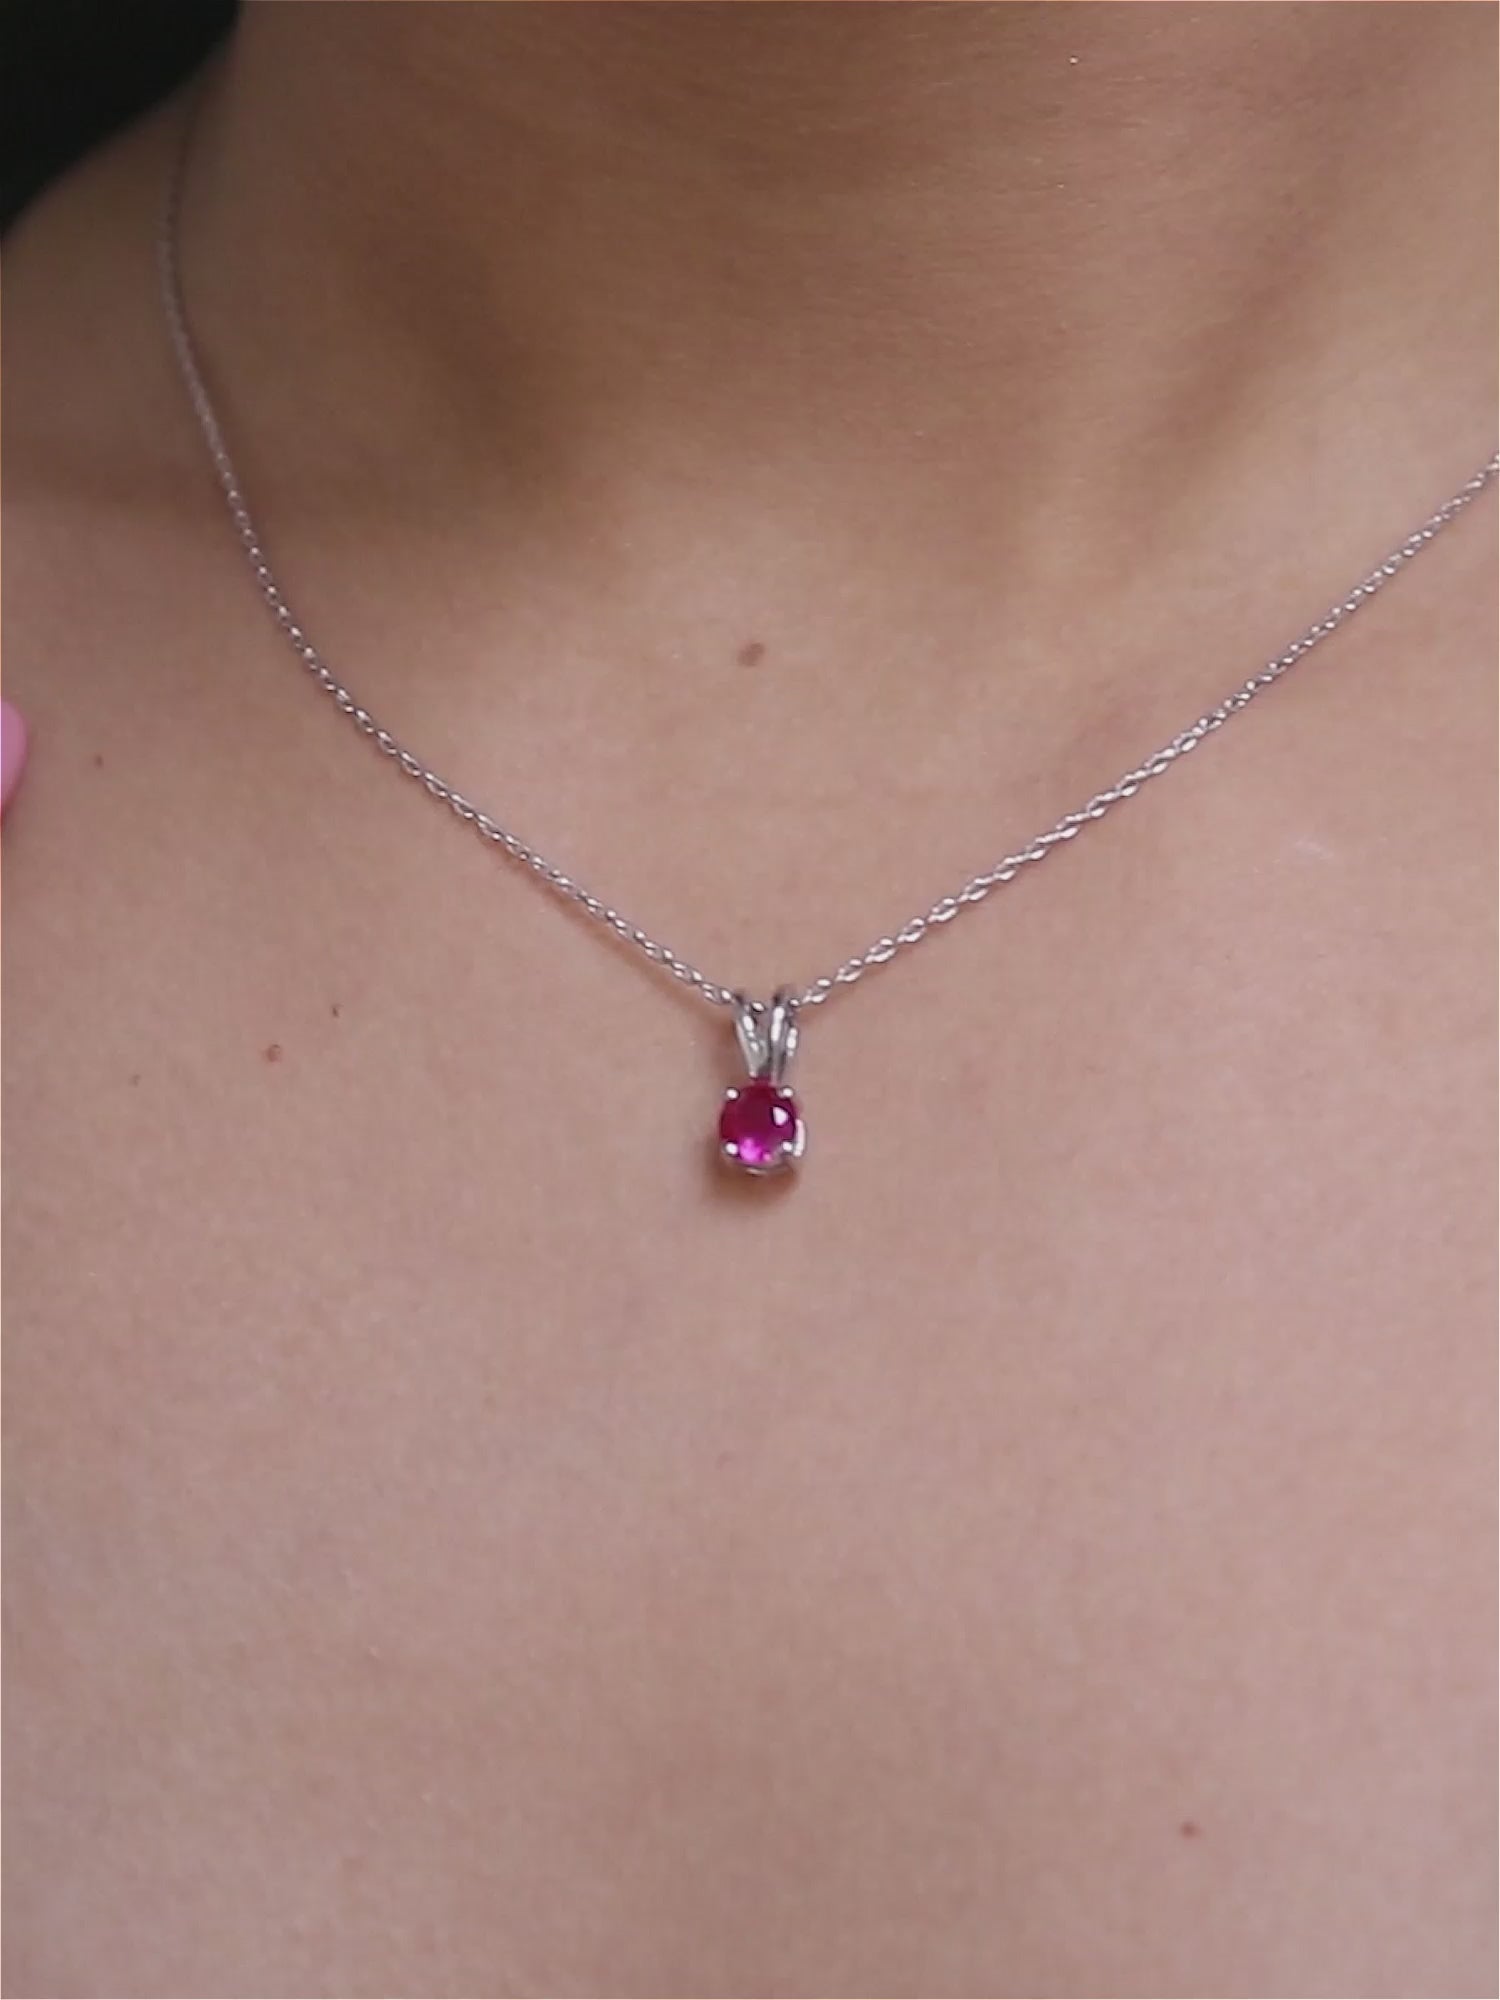 ORNATE 0.50 CARAT RUBY PENDANT NECKLACE IN SILVER FOR WOMEN